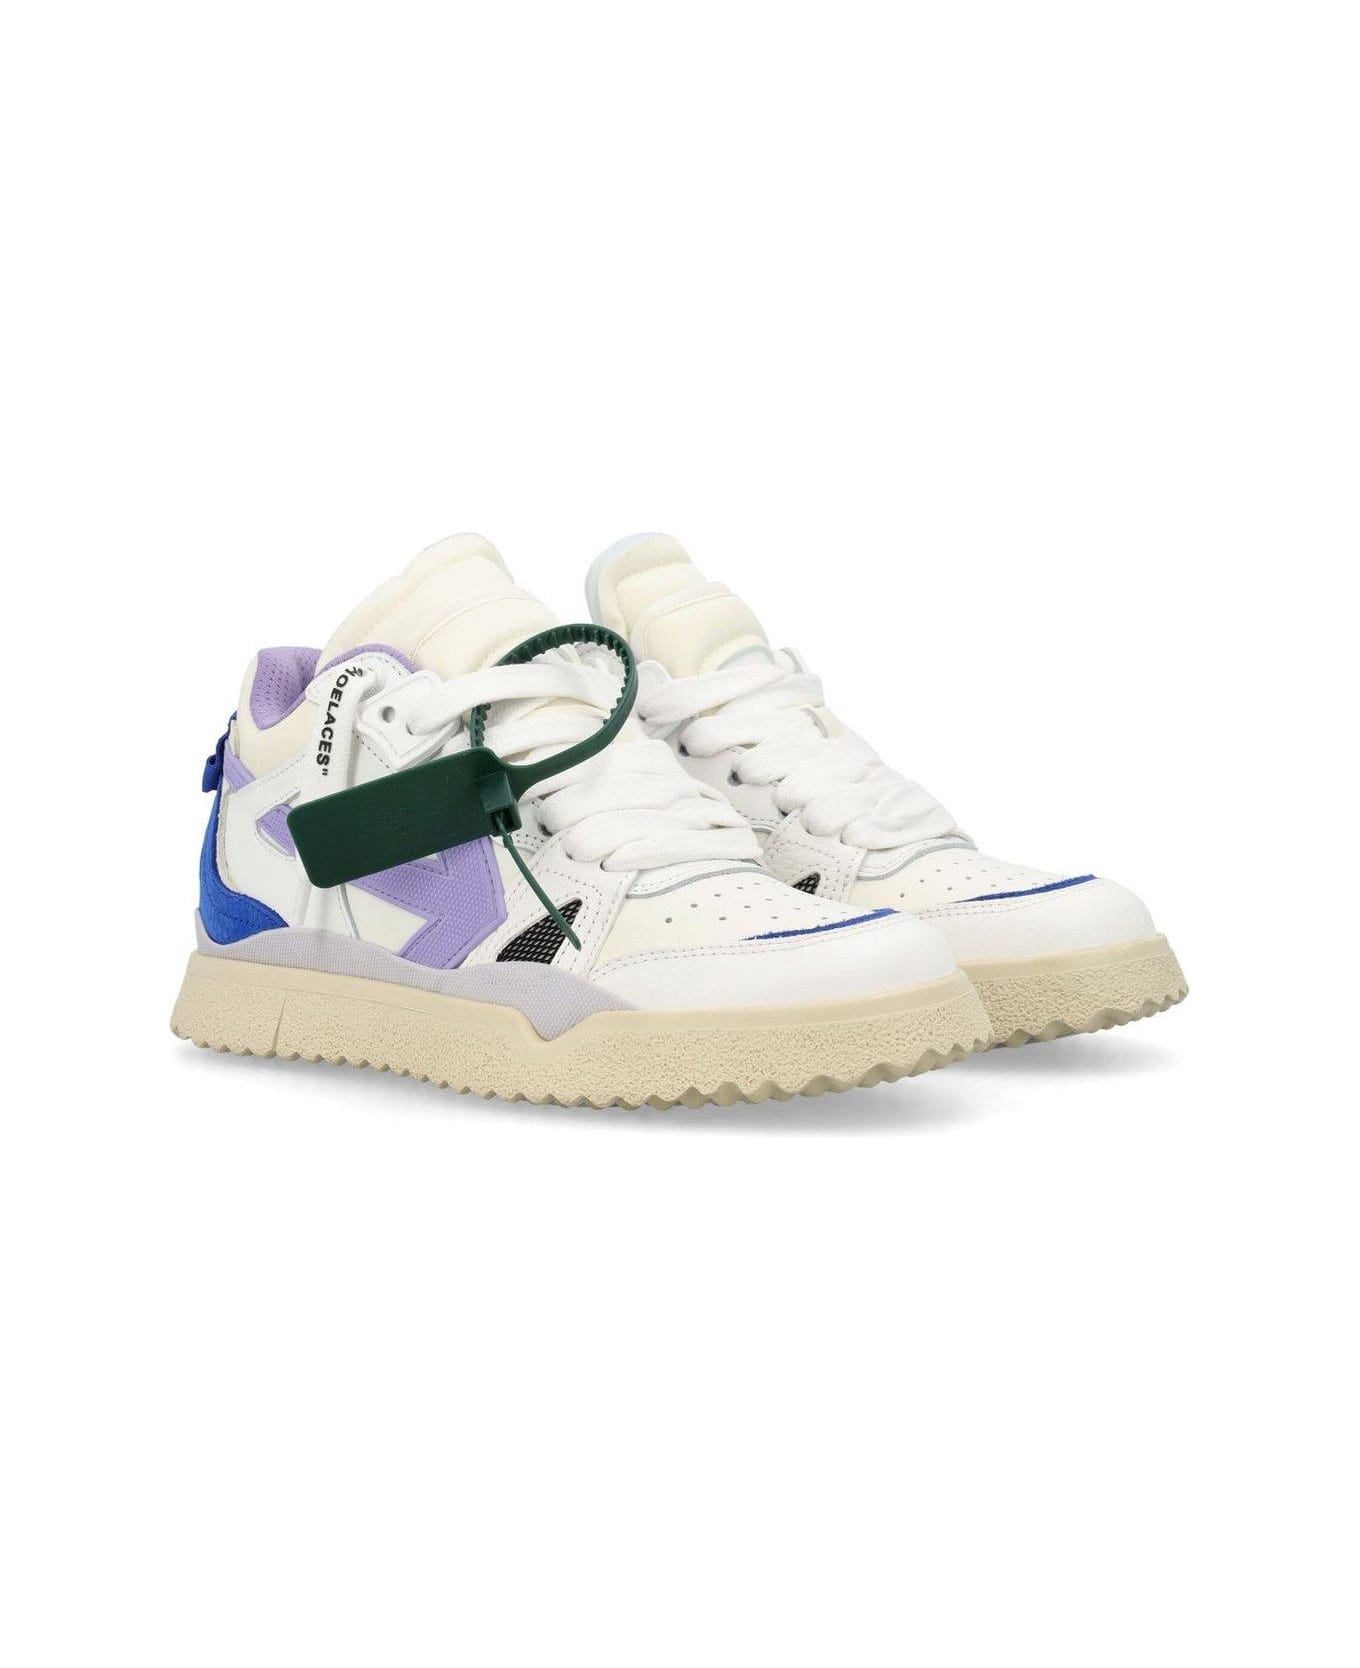 Off-White Sponge Lace-up Sneakers - White Lilac